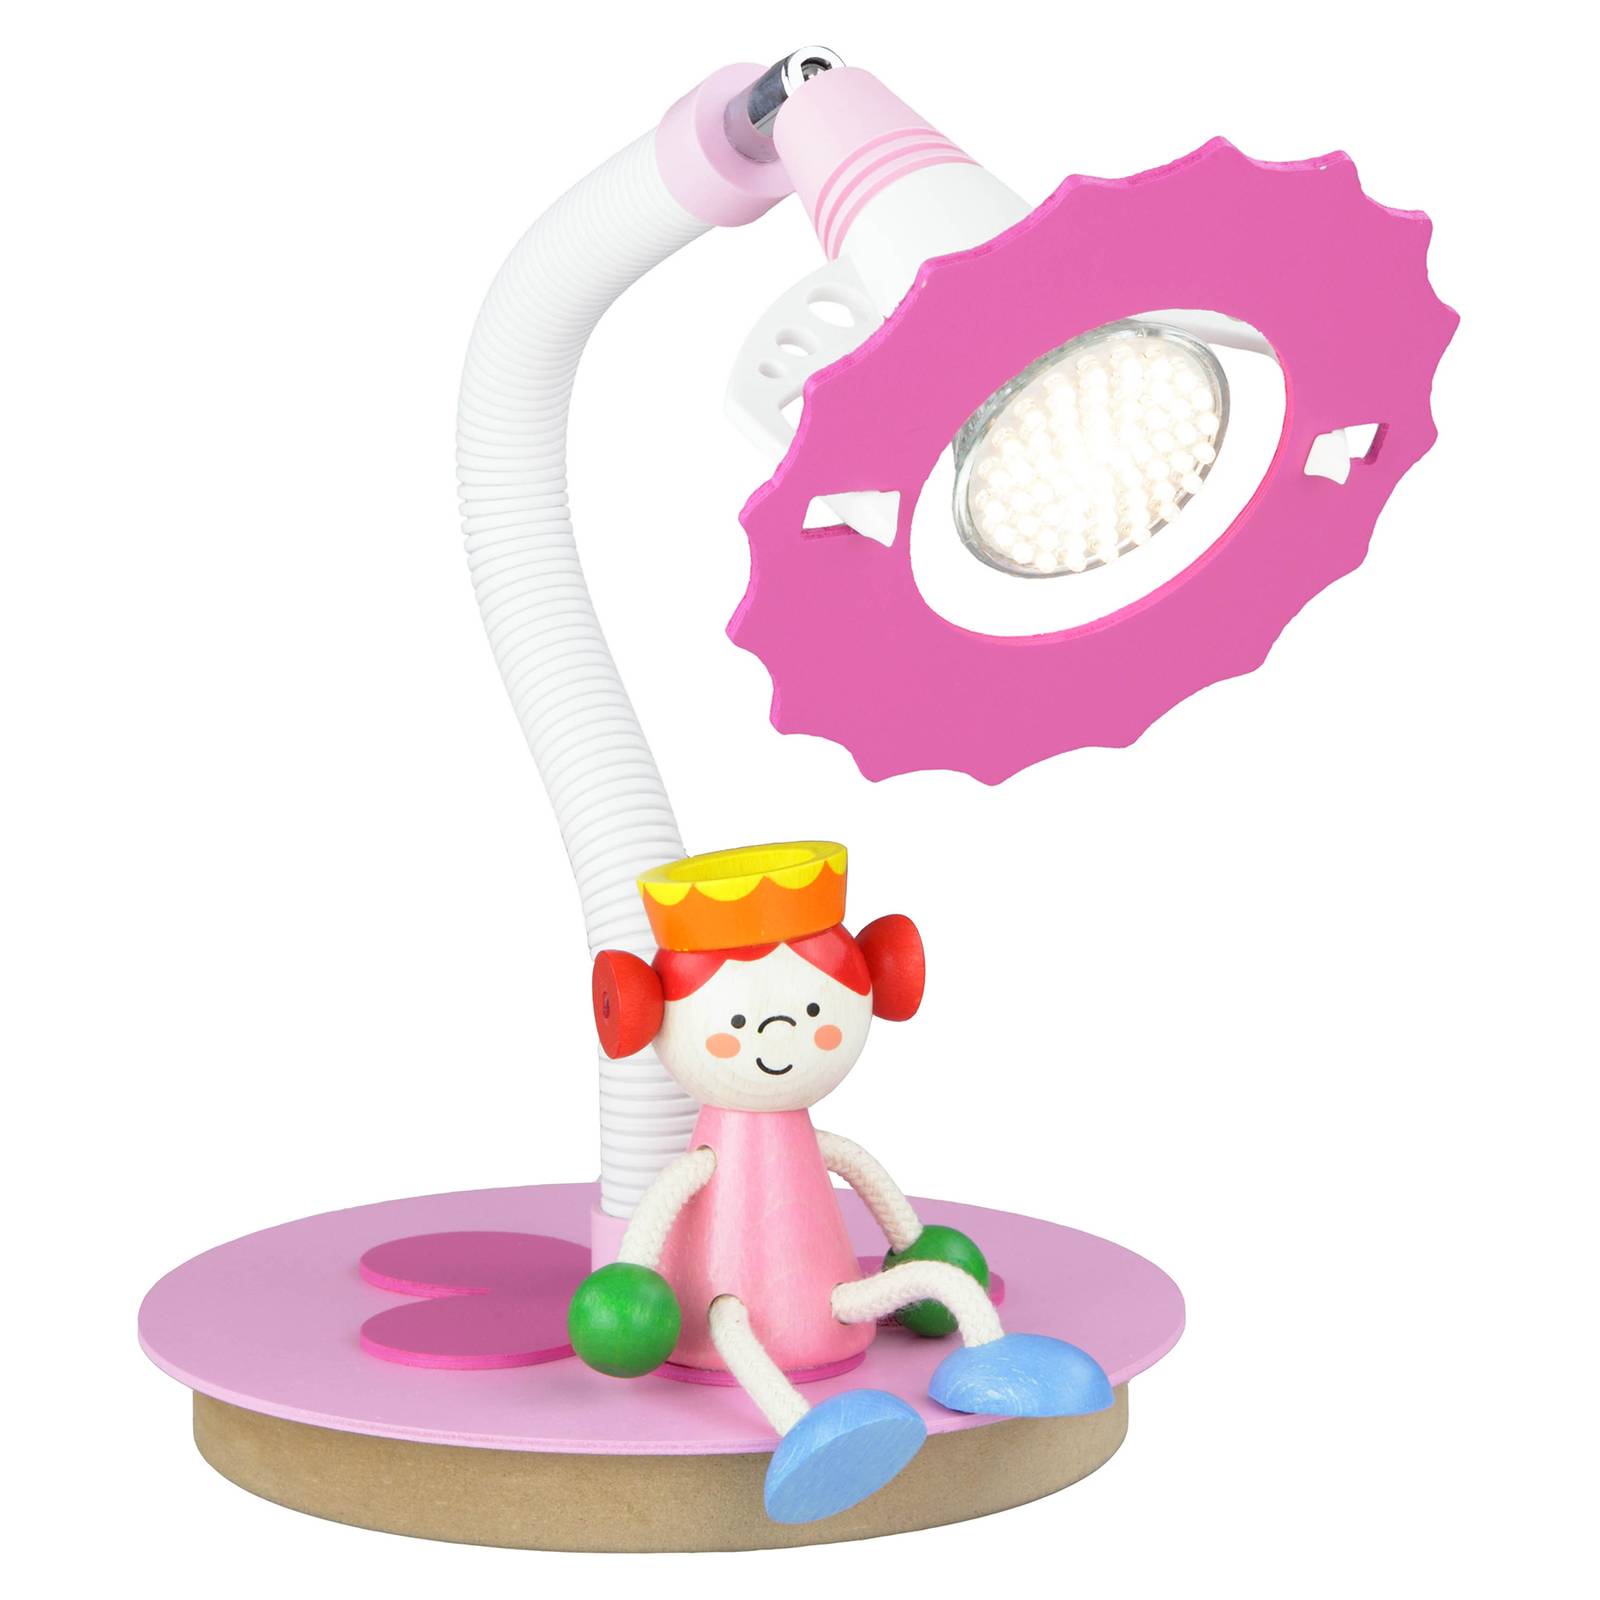 Princess LED table lamp with a sitting figure